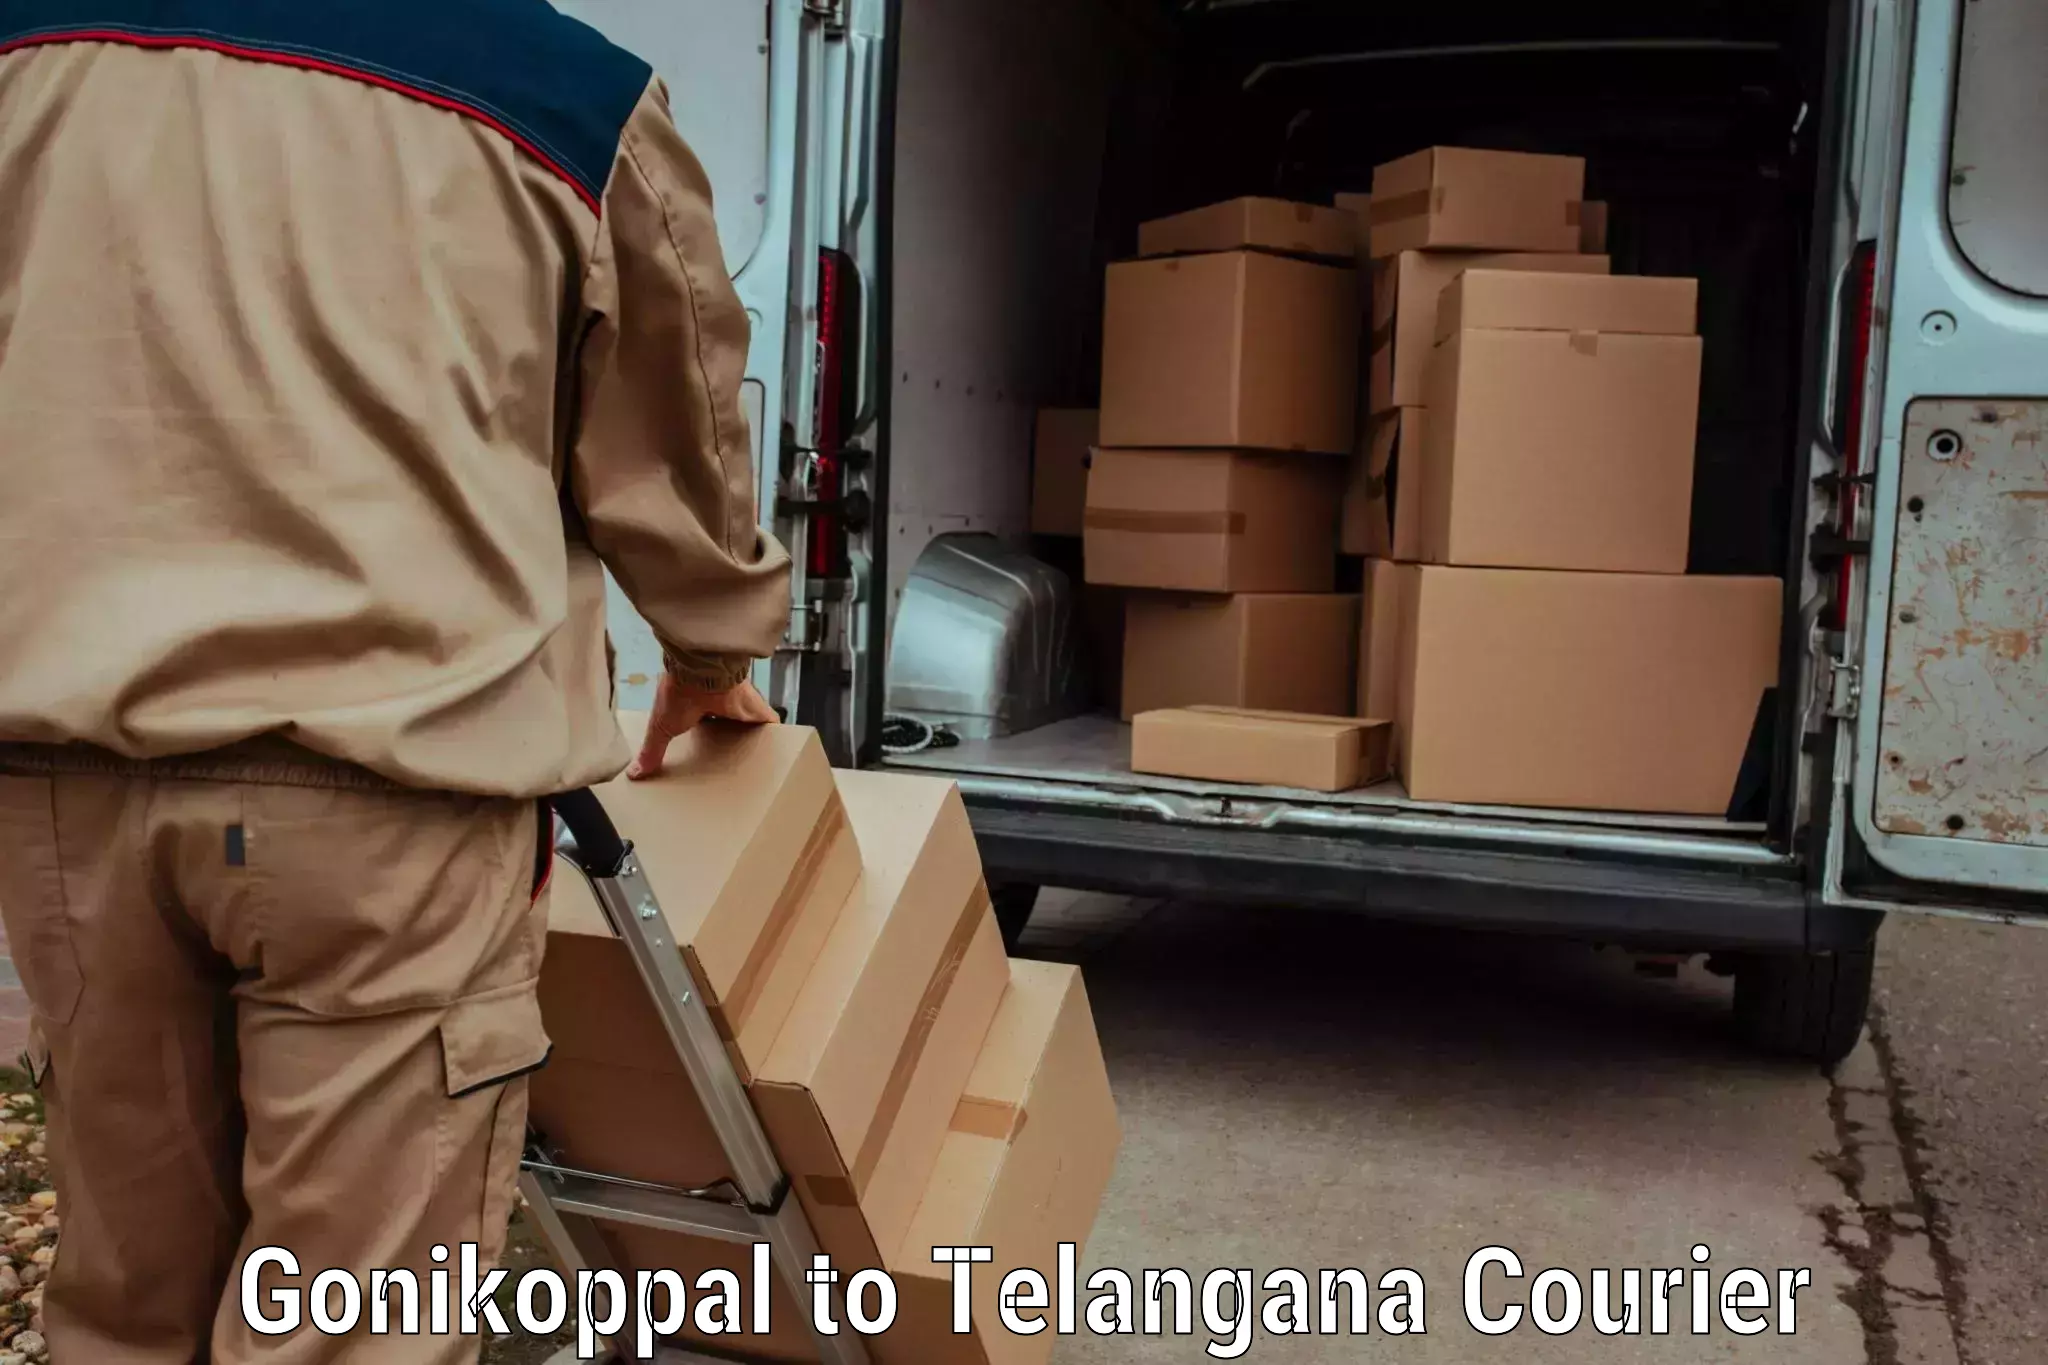 Global courier networks Gonikoppal to Telangana